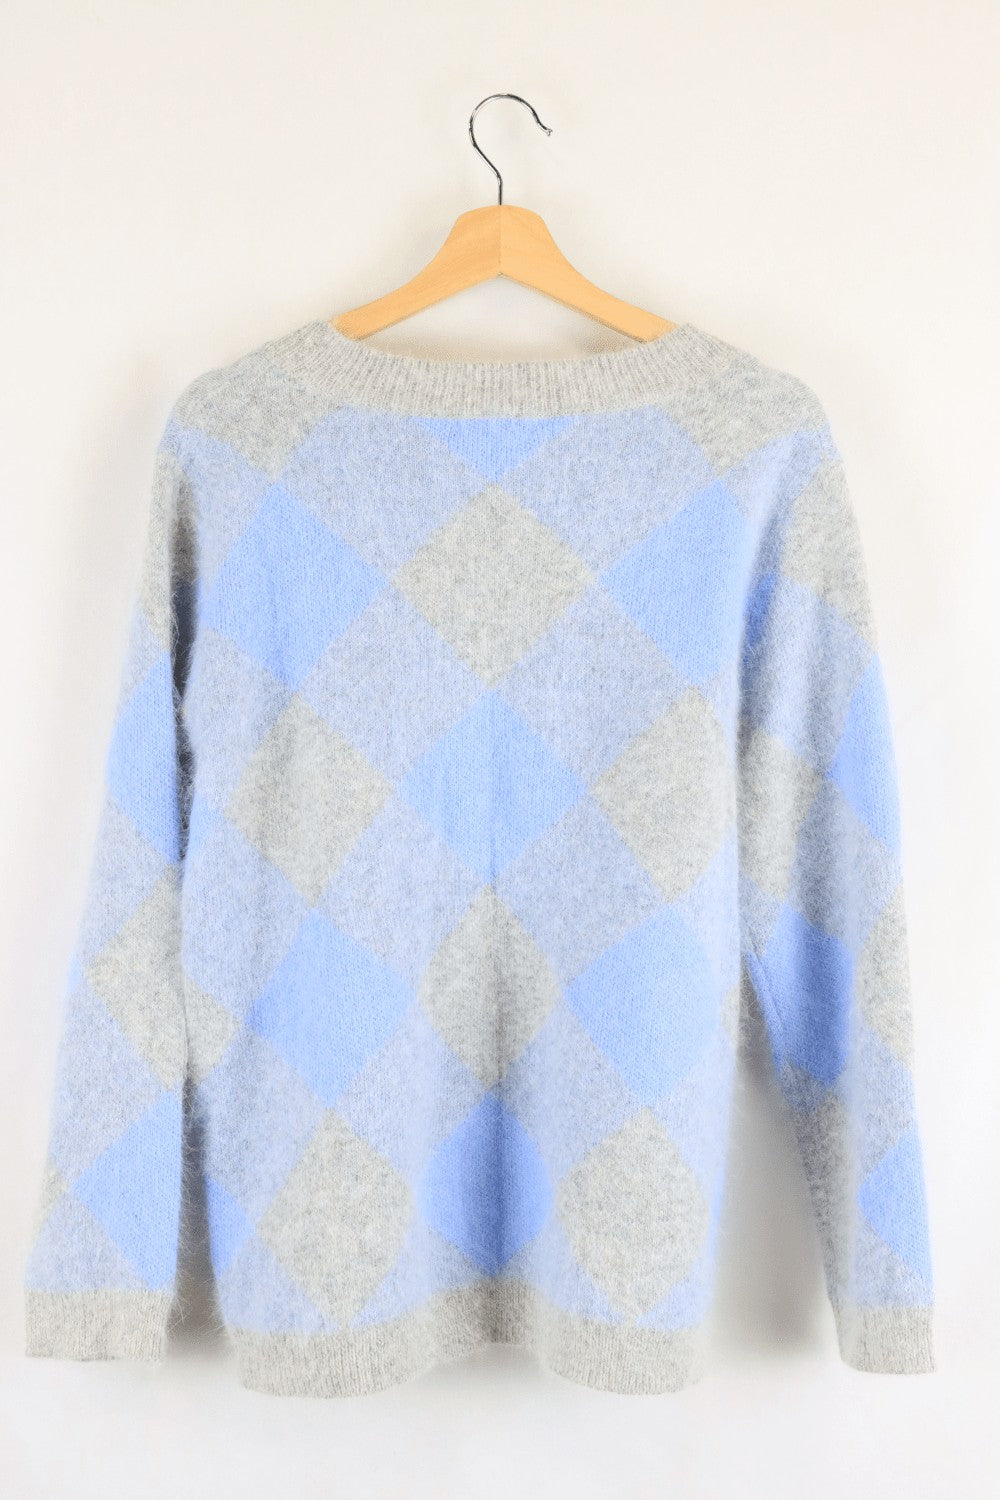 See Saw Blue And Grey Knit M